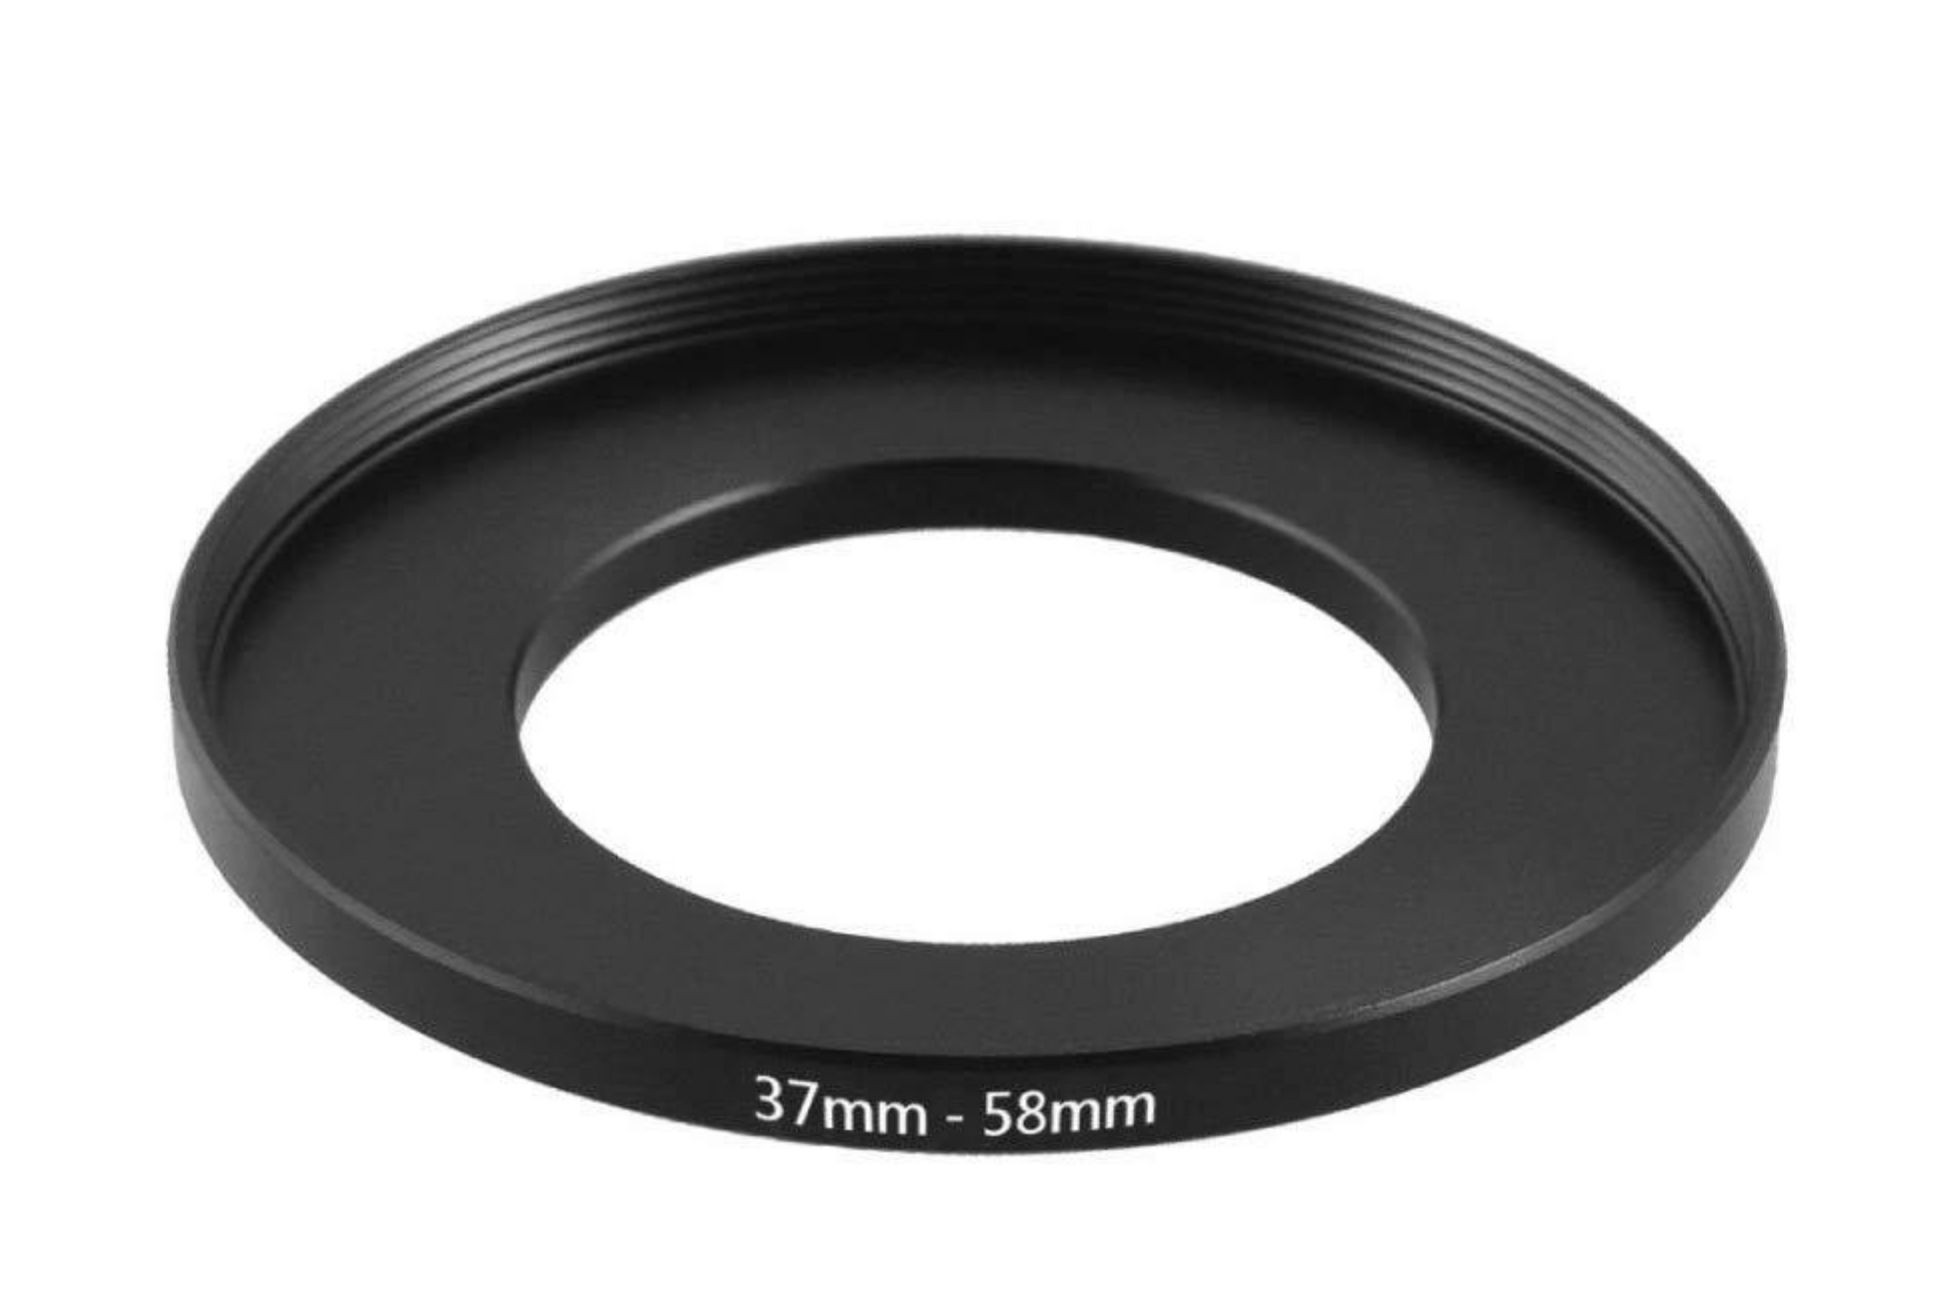 Promaster 5204 37-58 Step-Up Ring